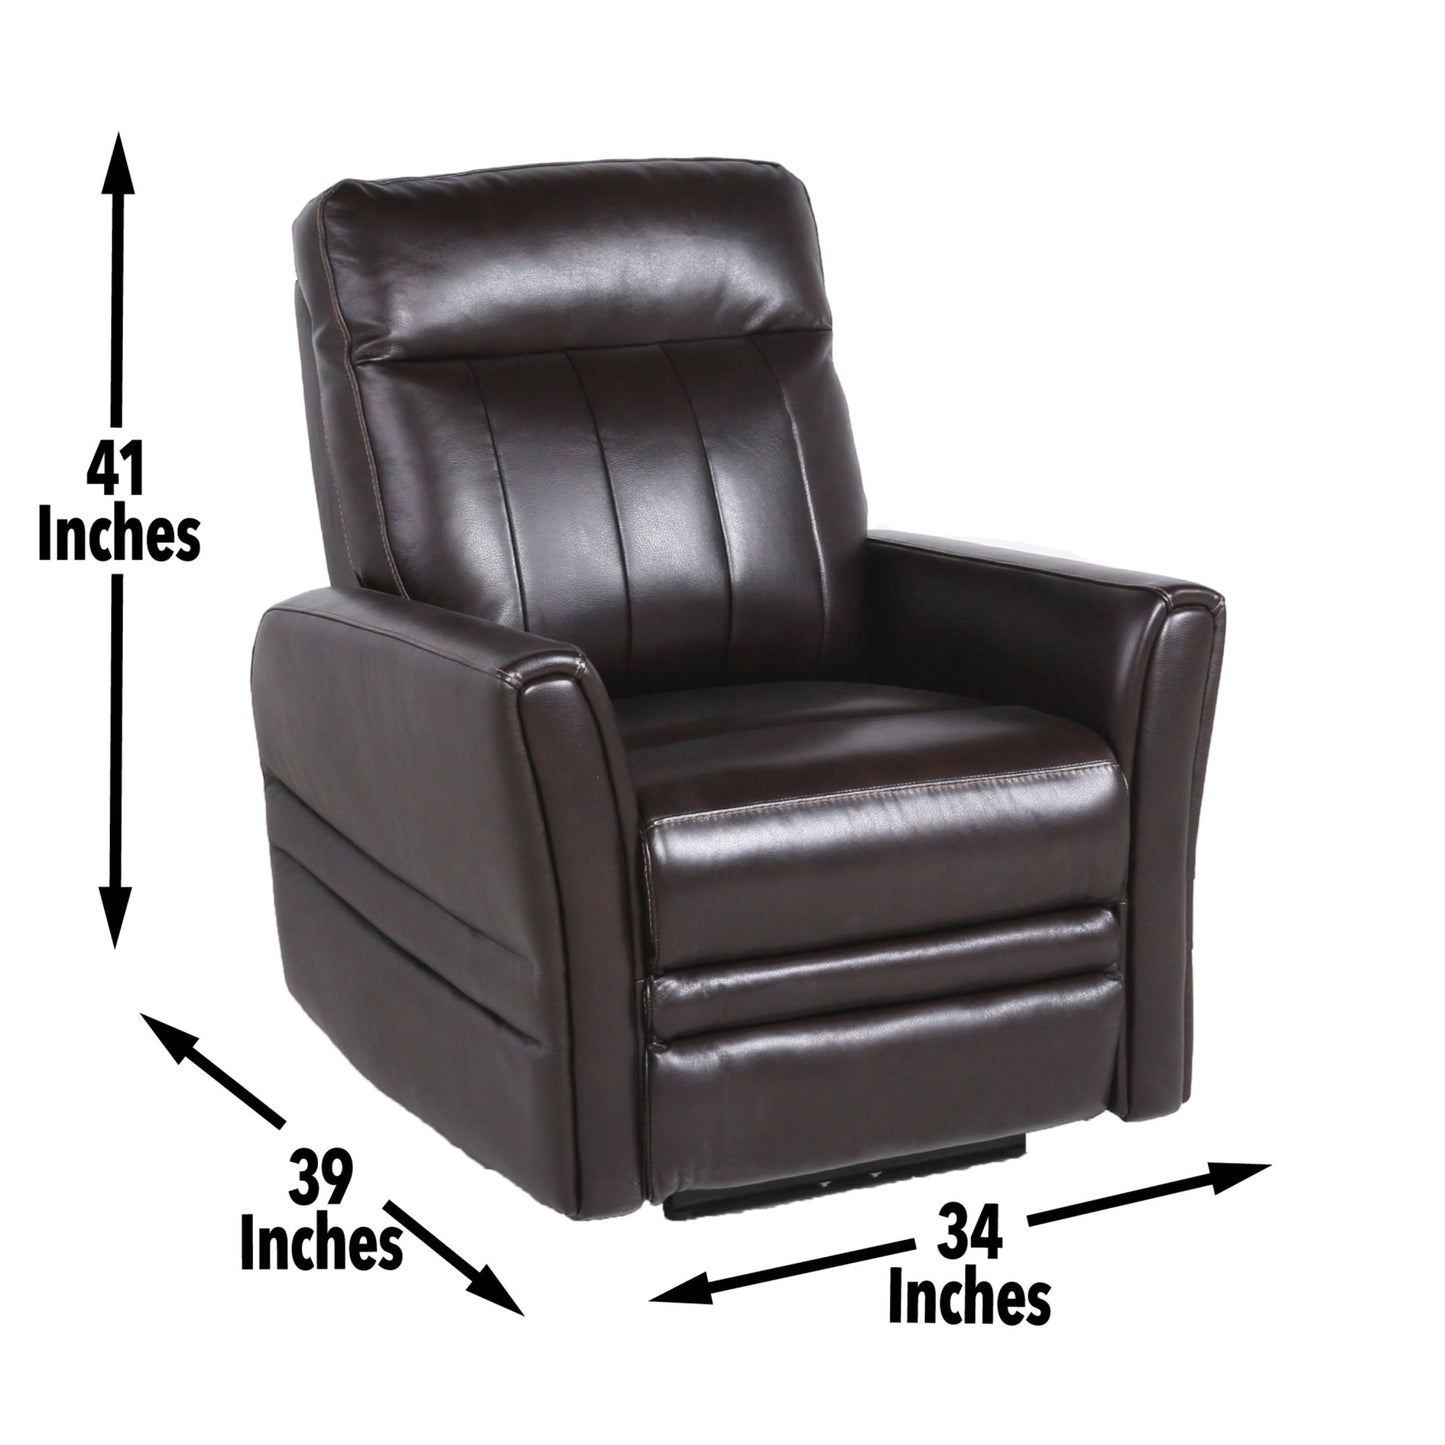 Dark Brown Top-Grain Leather Chair with Power Leg Rest and Articulating Headrest